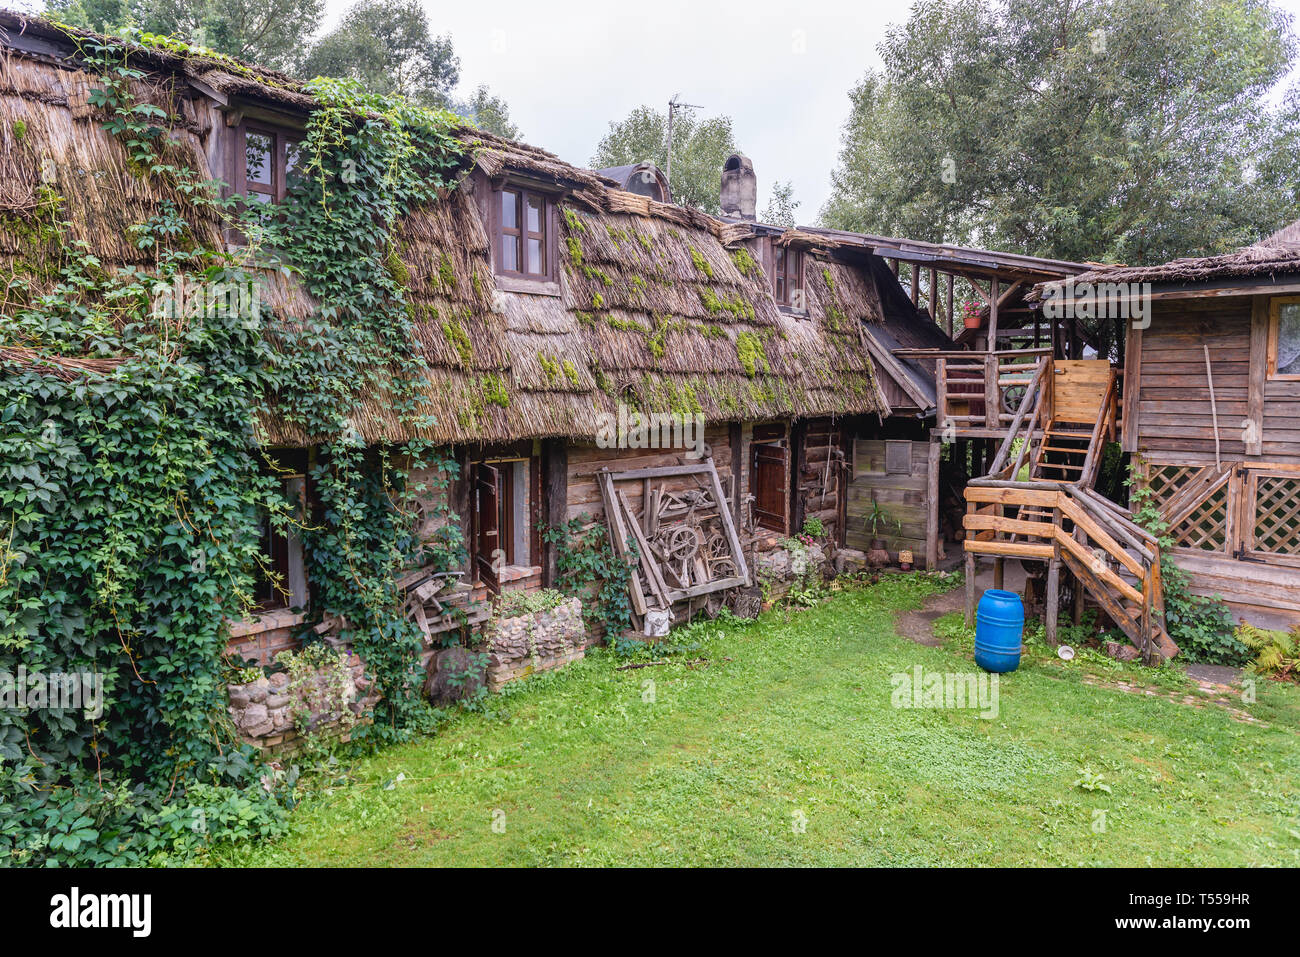 At the End of the World Inn - farm accommodation for tourists in Kruszyniany village, Podlasie region of Poland Stock Photo pic